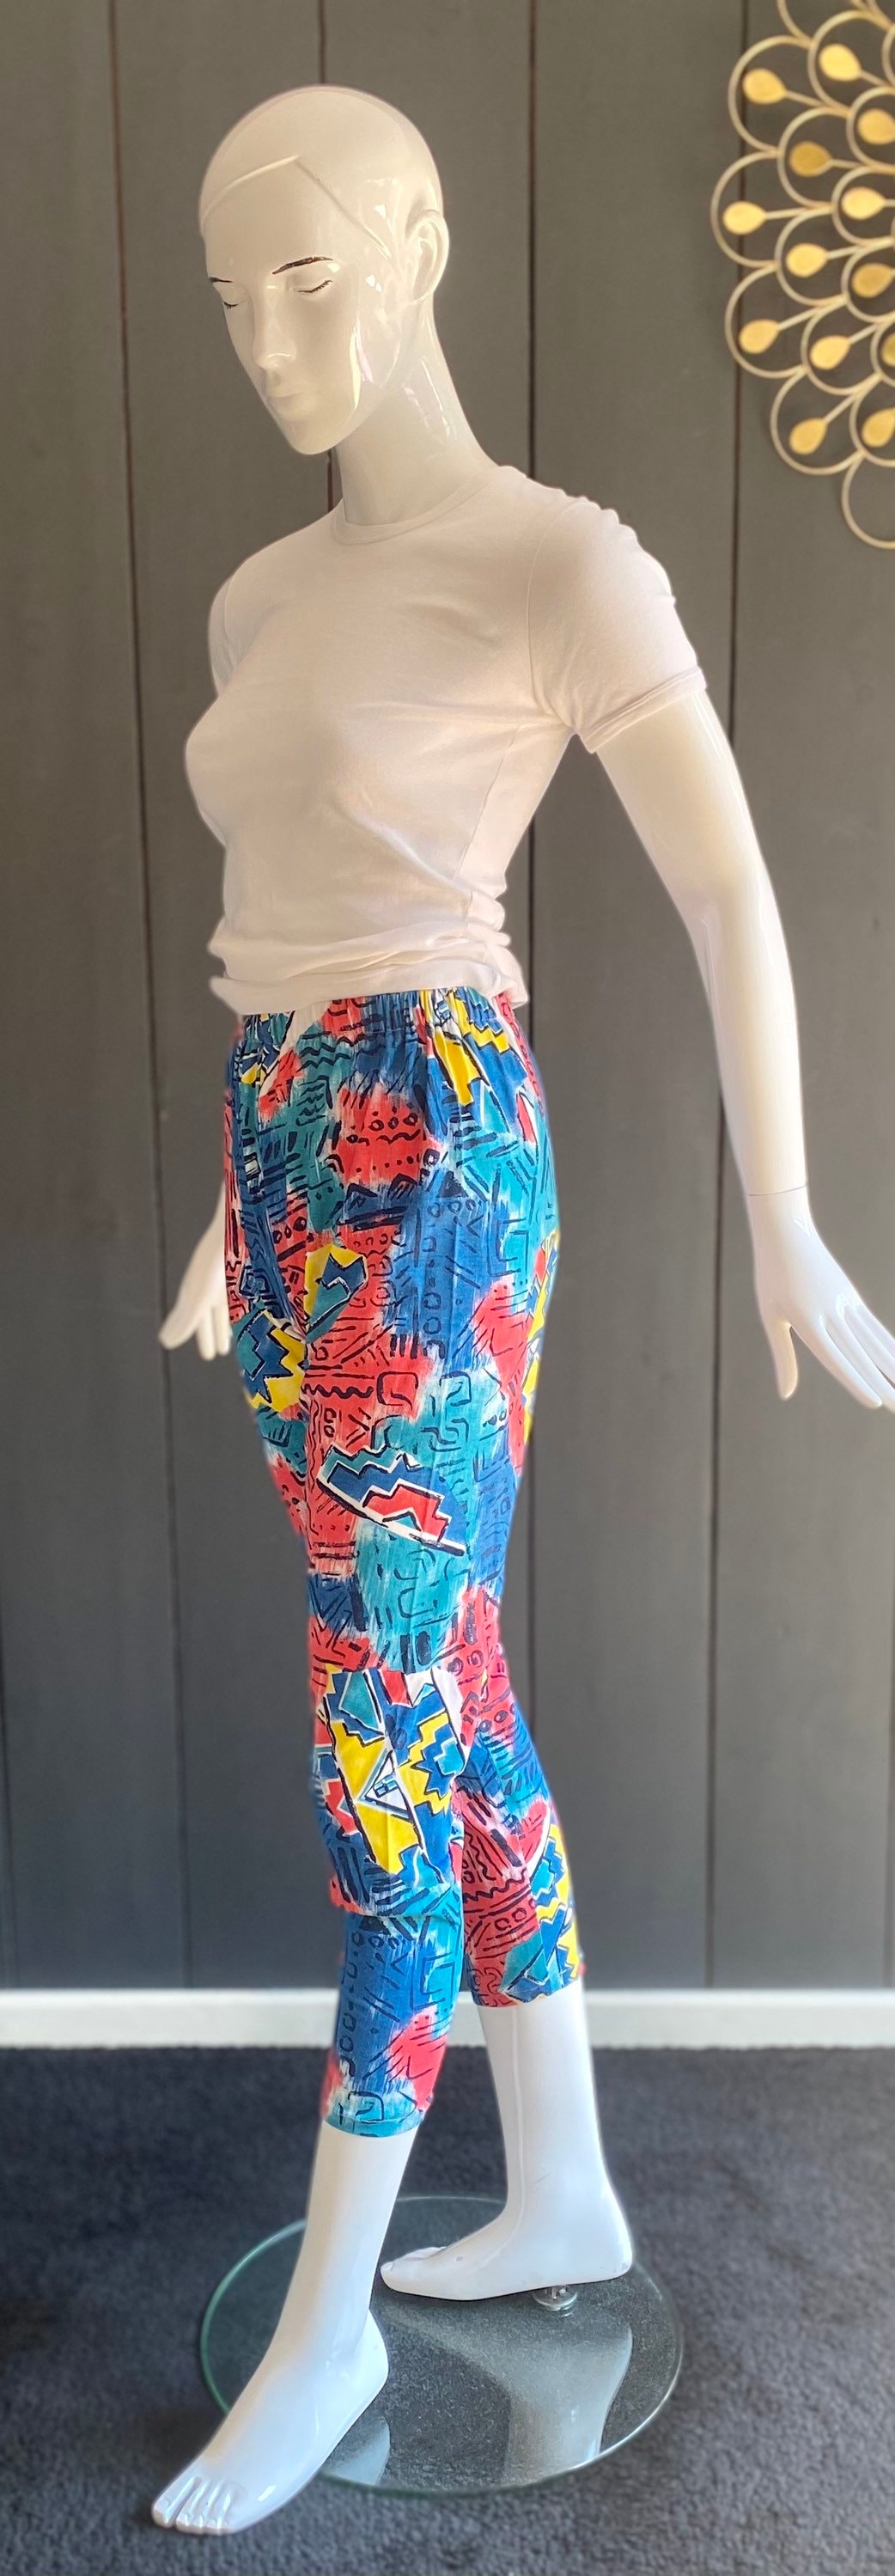 Vintage 80s Leggings With Colorful Abstract Jungle City Patterns, Dominant  Green, Blue and Red, Ankle Length, Size 36/38 -  New Zealand